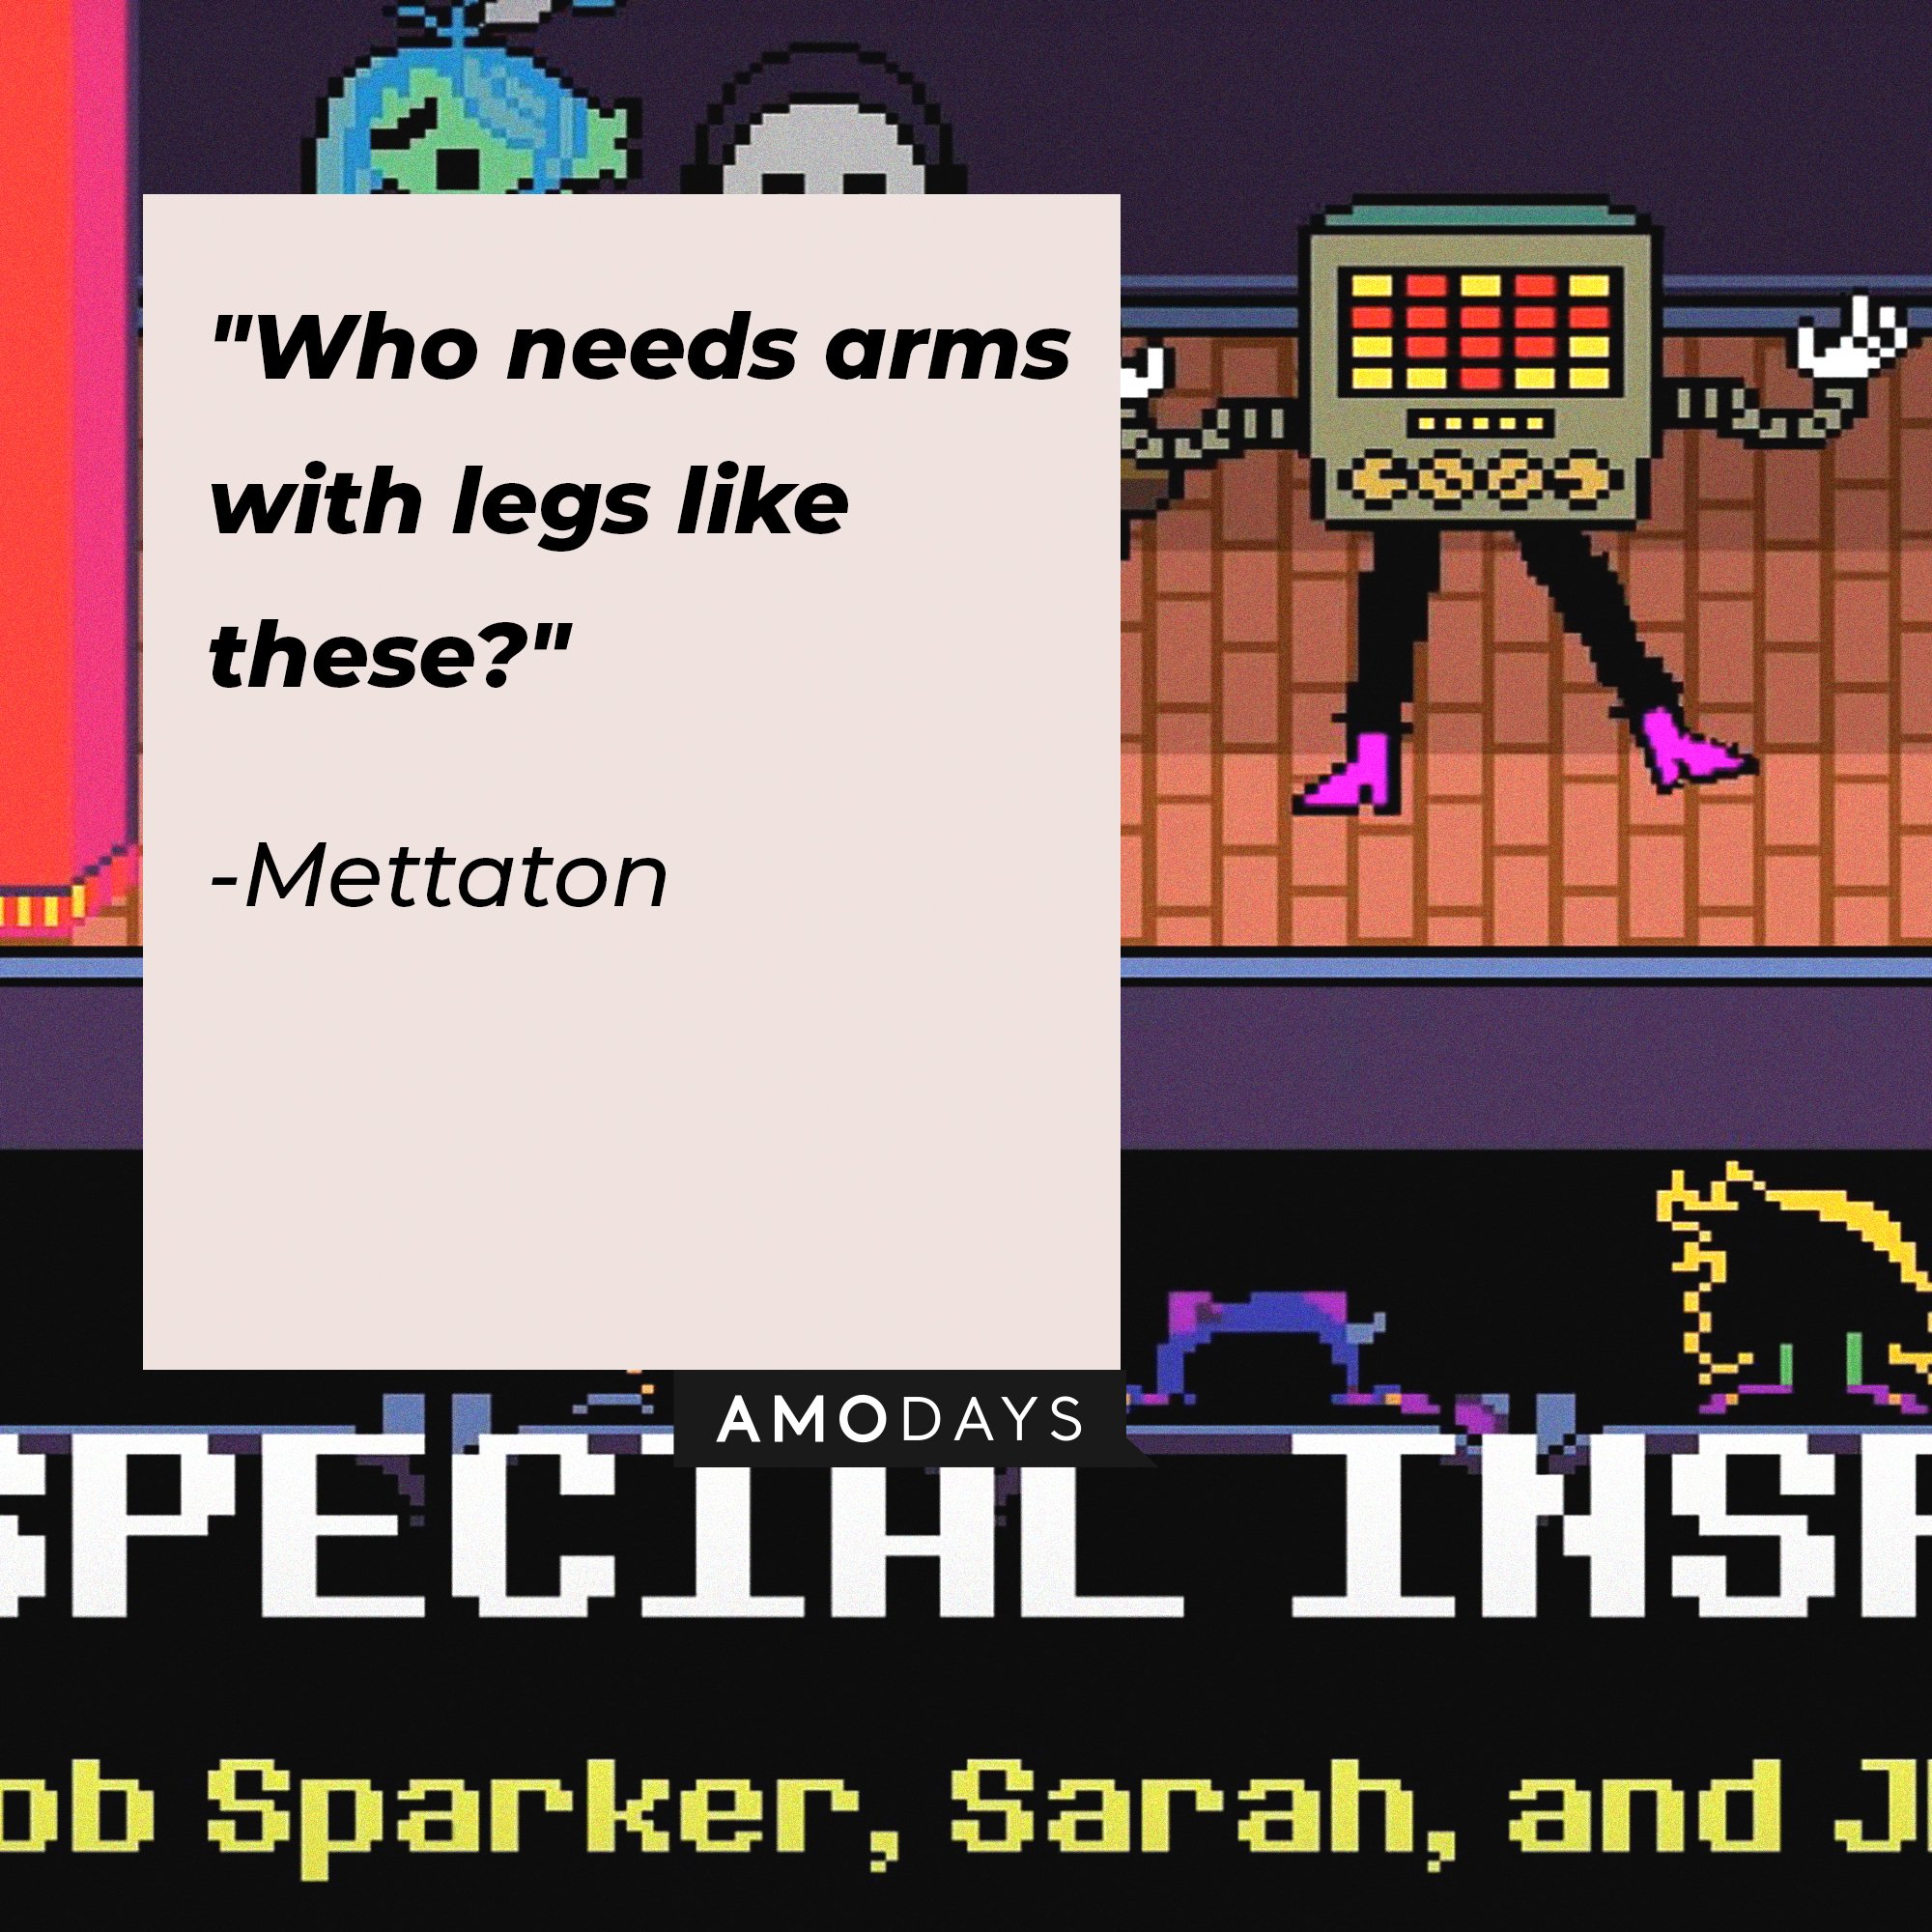 Mettaton’s quote: "Who needs arms with legs like these?" | Image: AmoDays